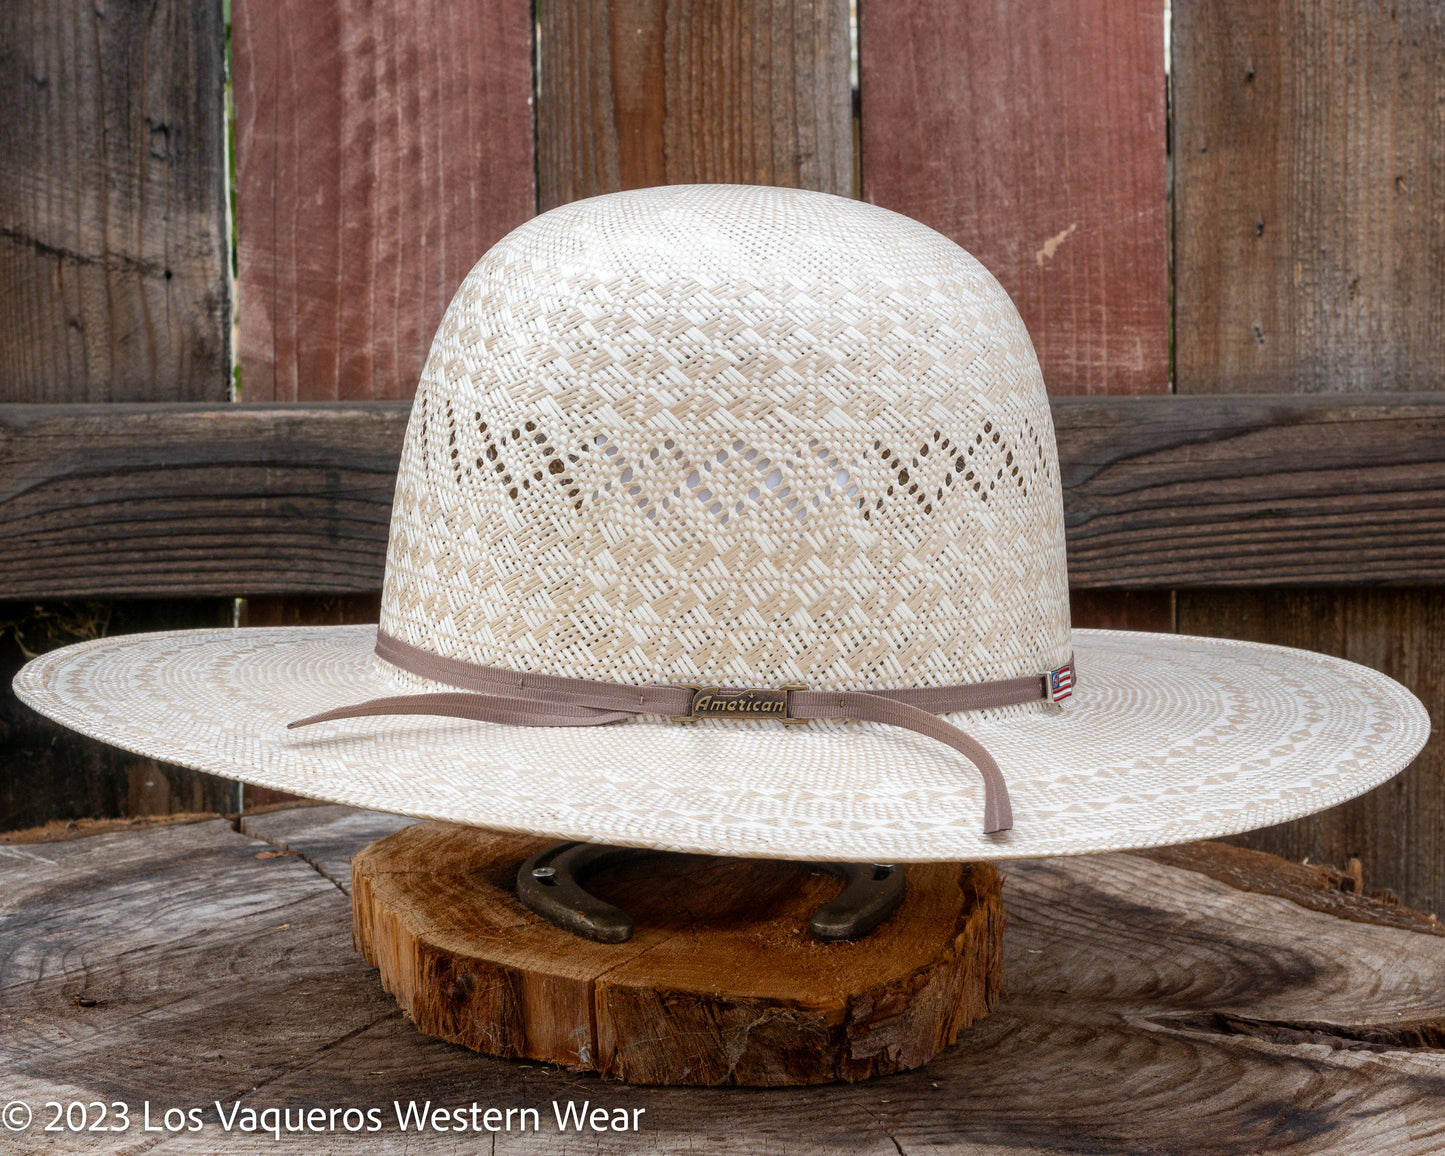 American Hat Company Straw Hat Regular Crown Checkers Tan White